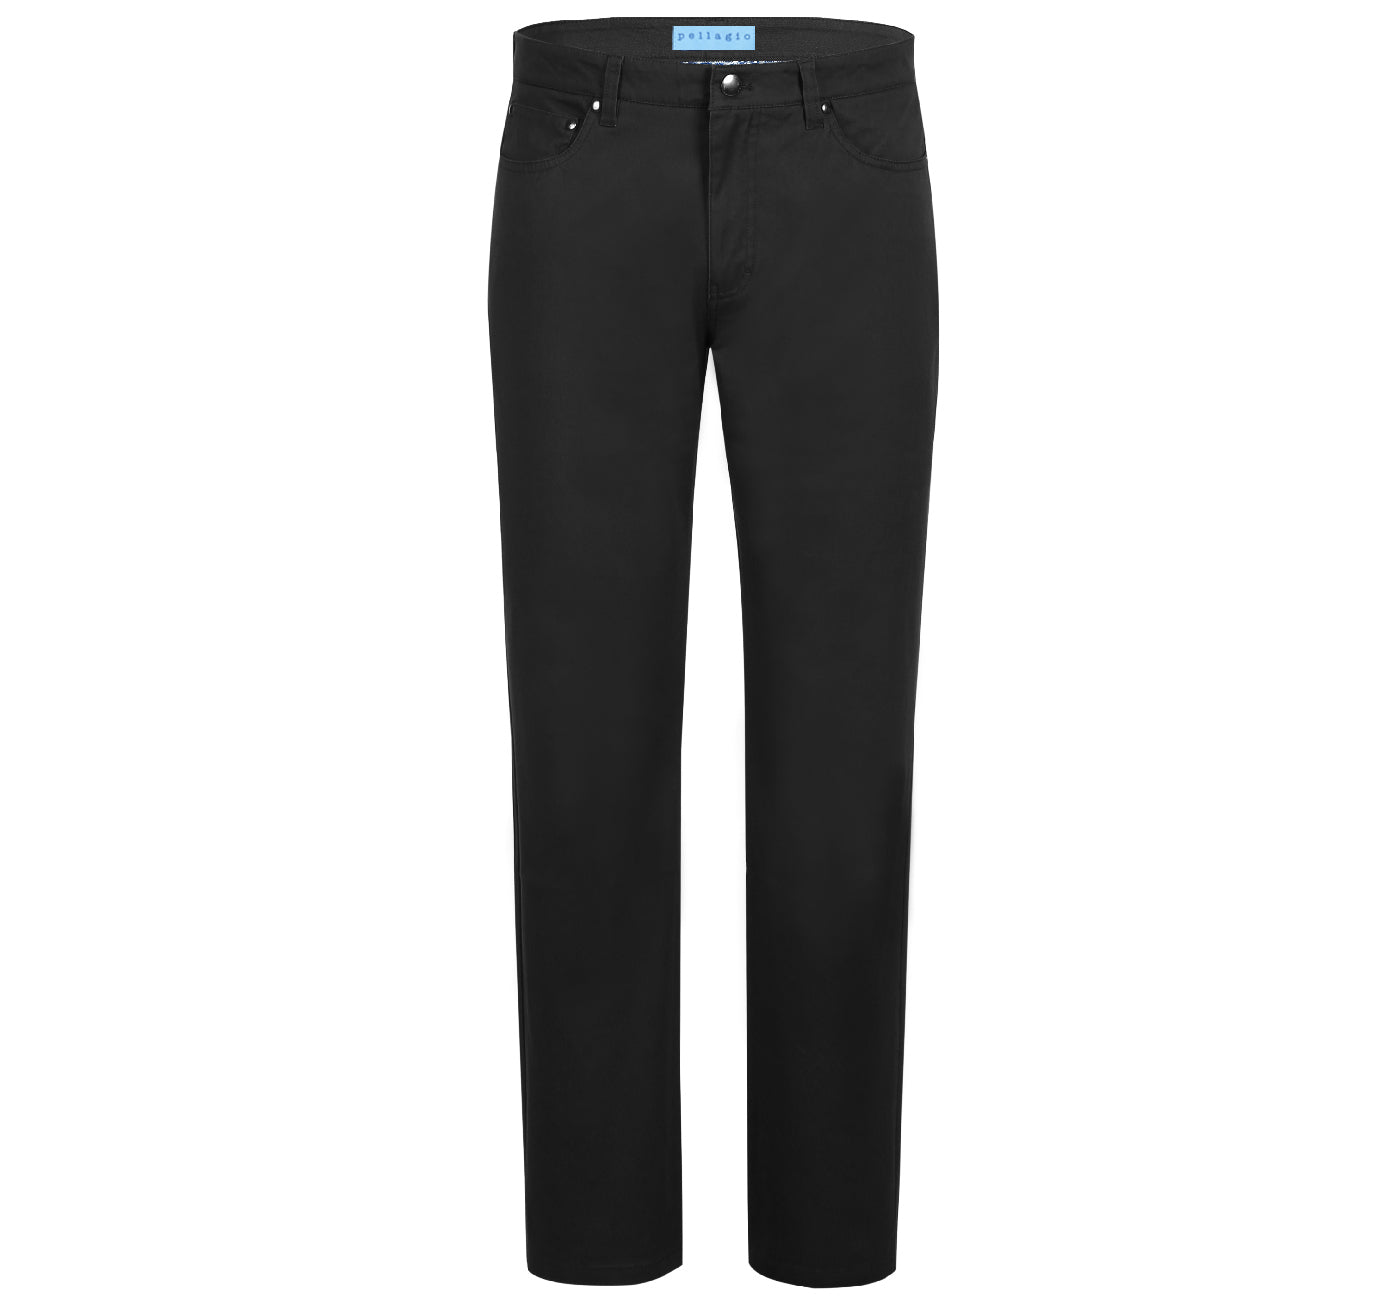 PF20-24 Men's 5-Pocket Black Cotton Stretch Washed Flat Front Chino Pants